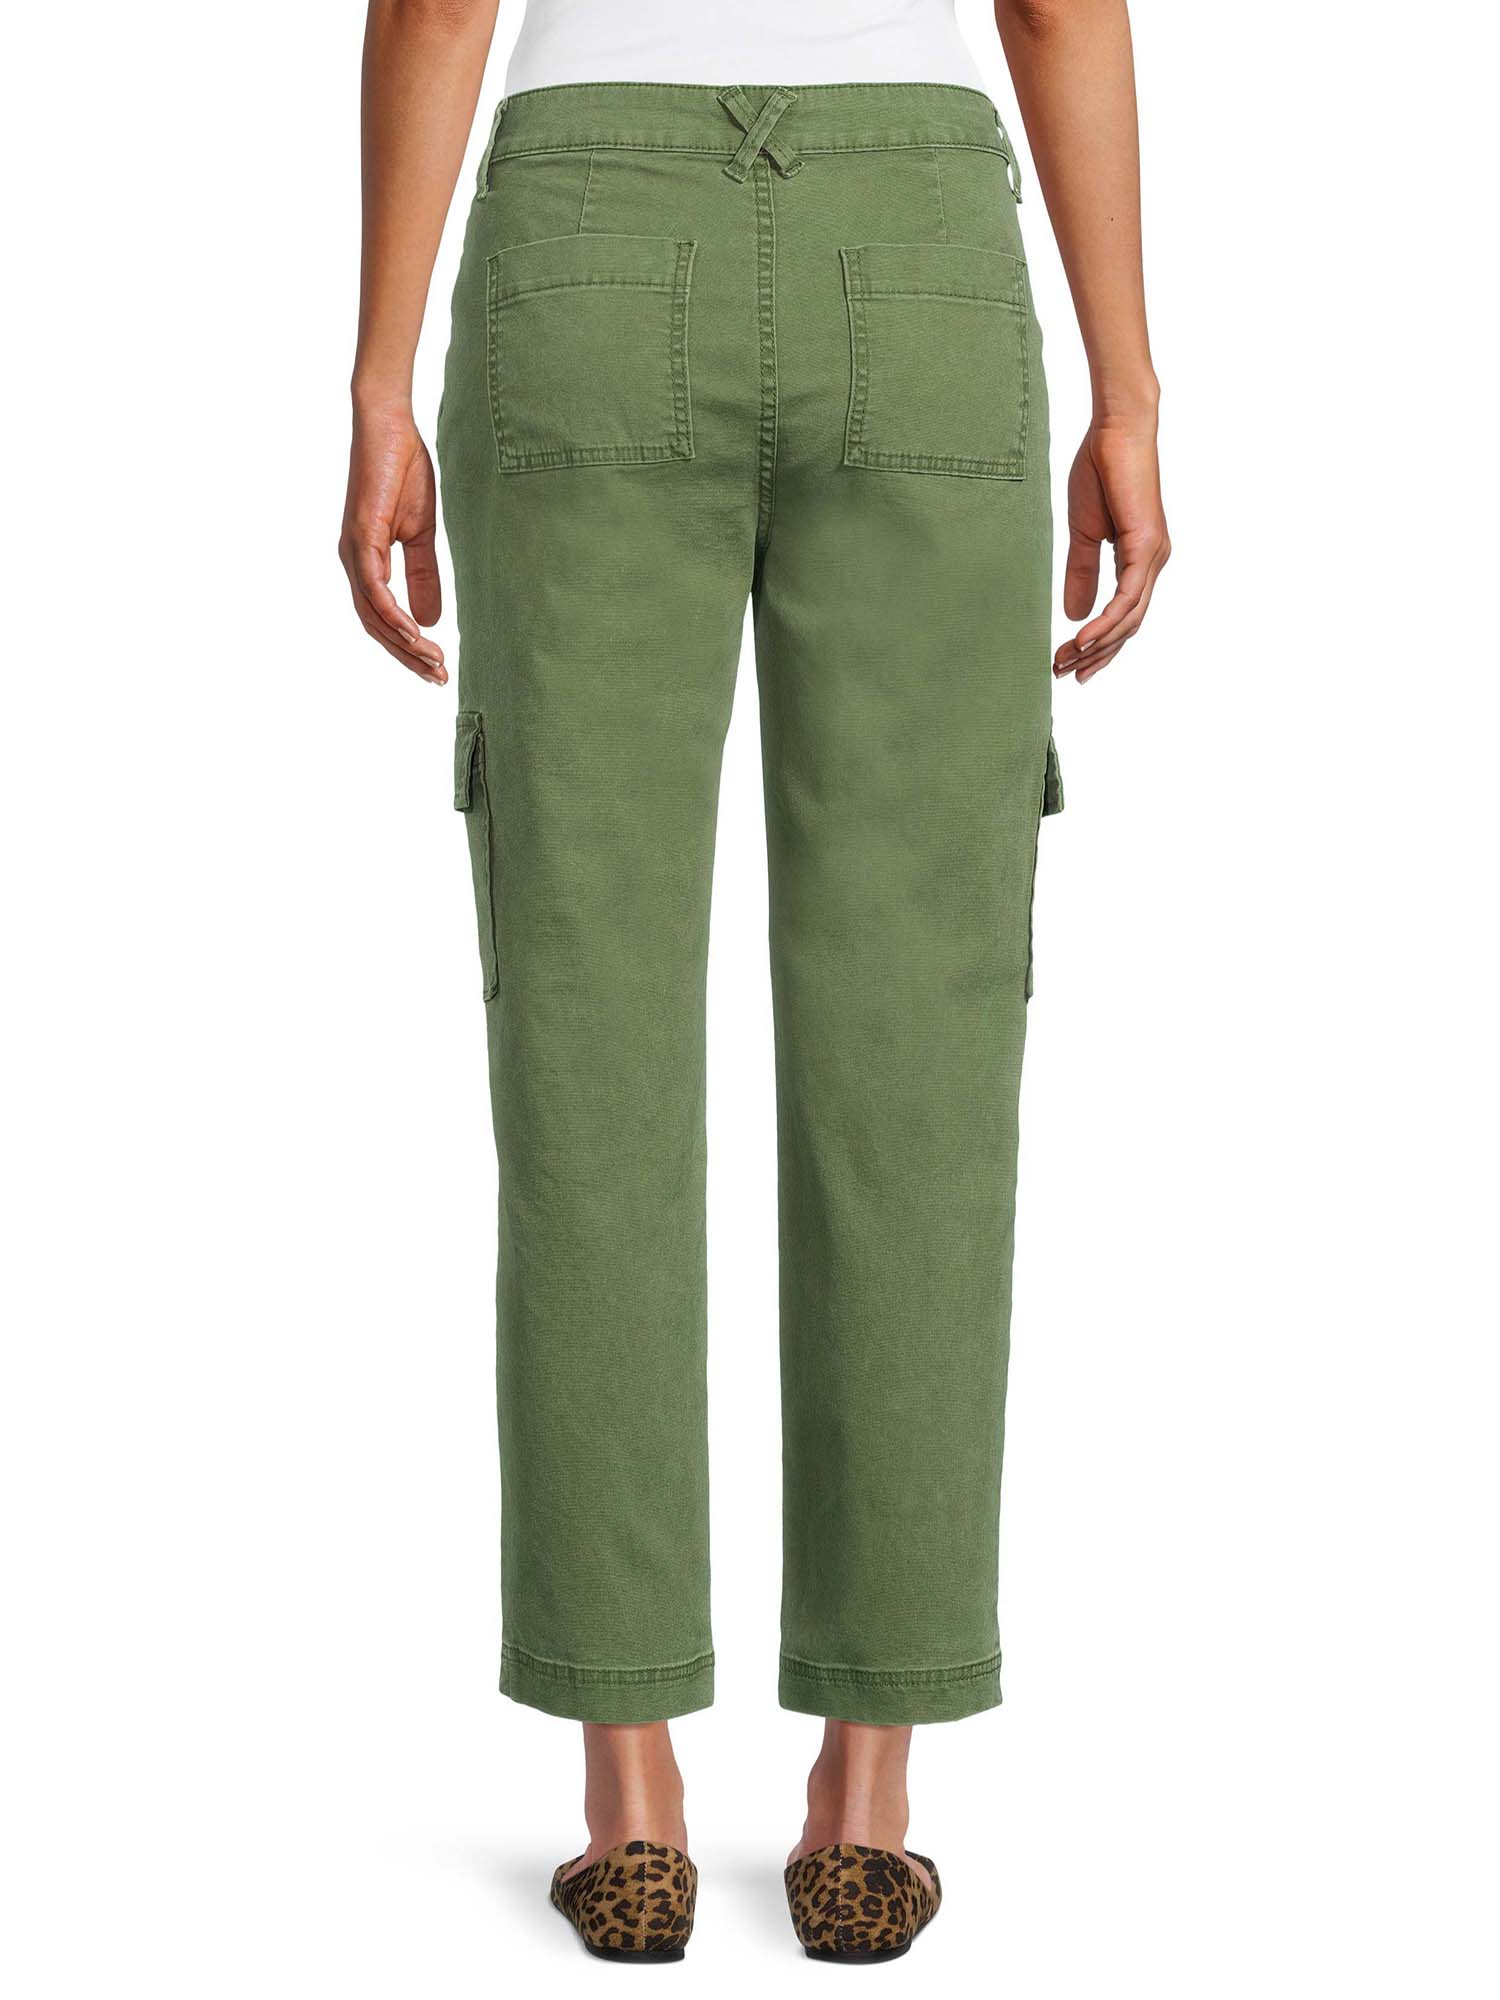 Time and Tru Women's Cargo Pants - image 3 of 5